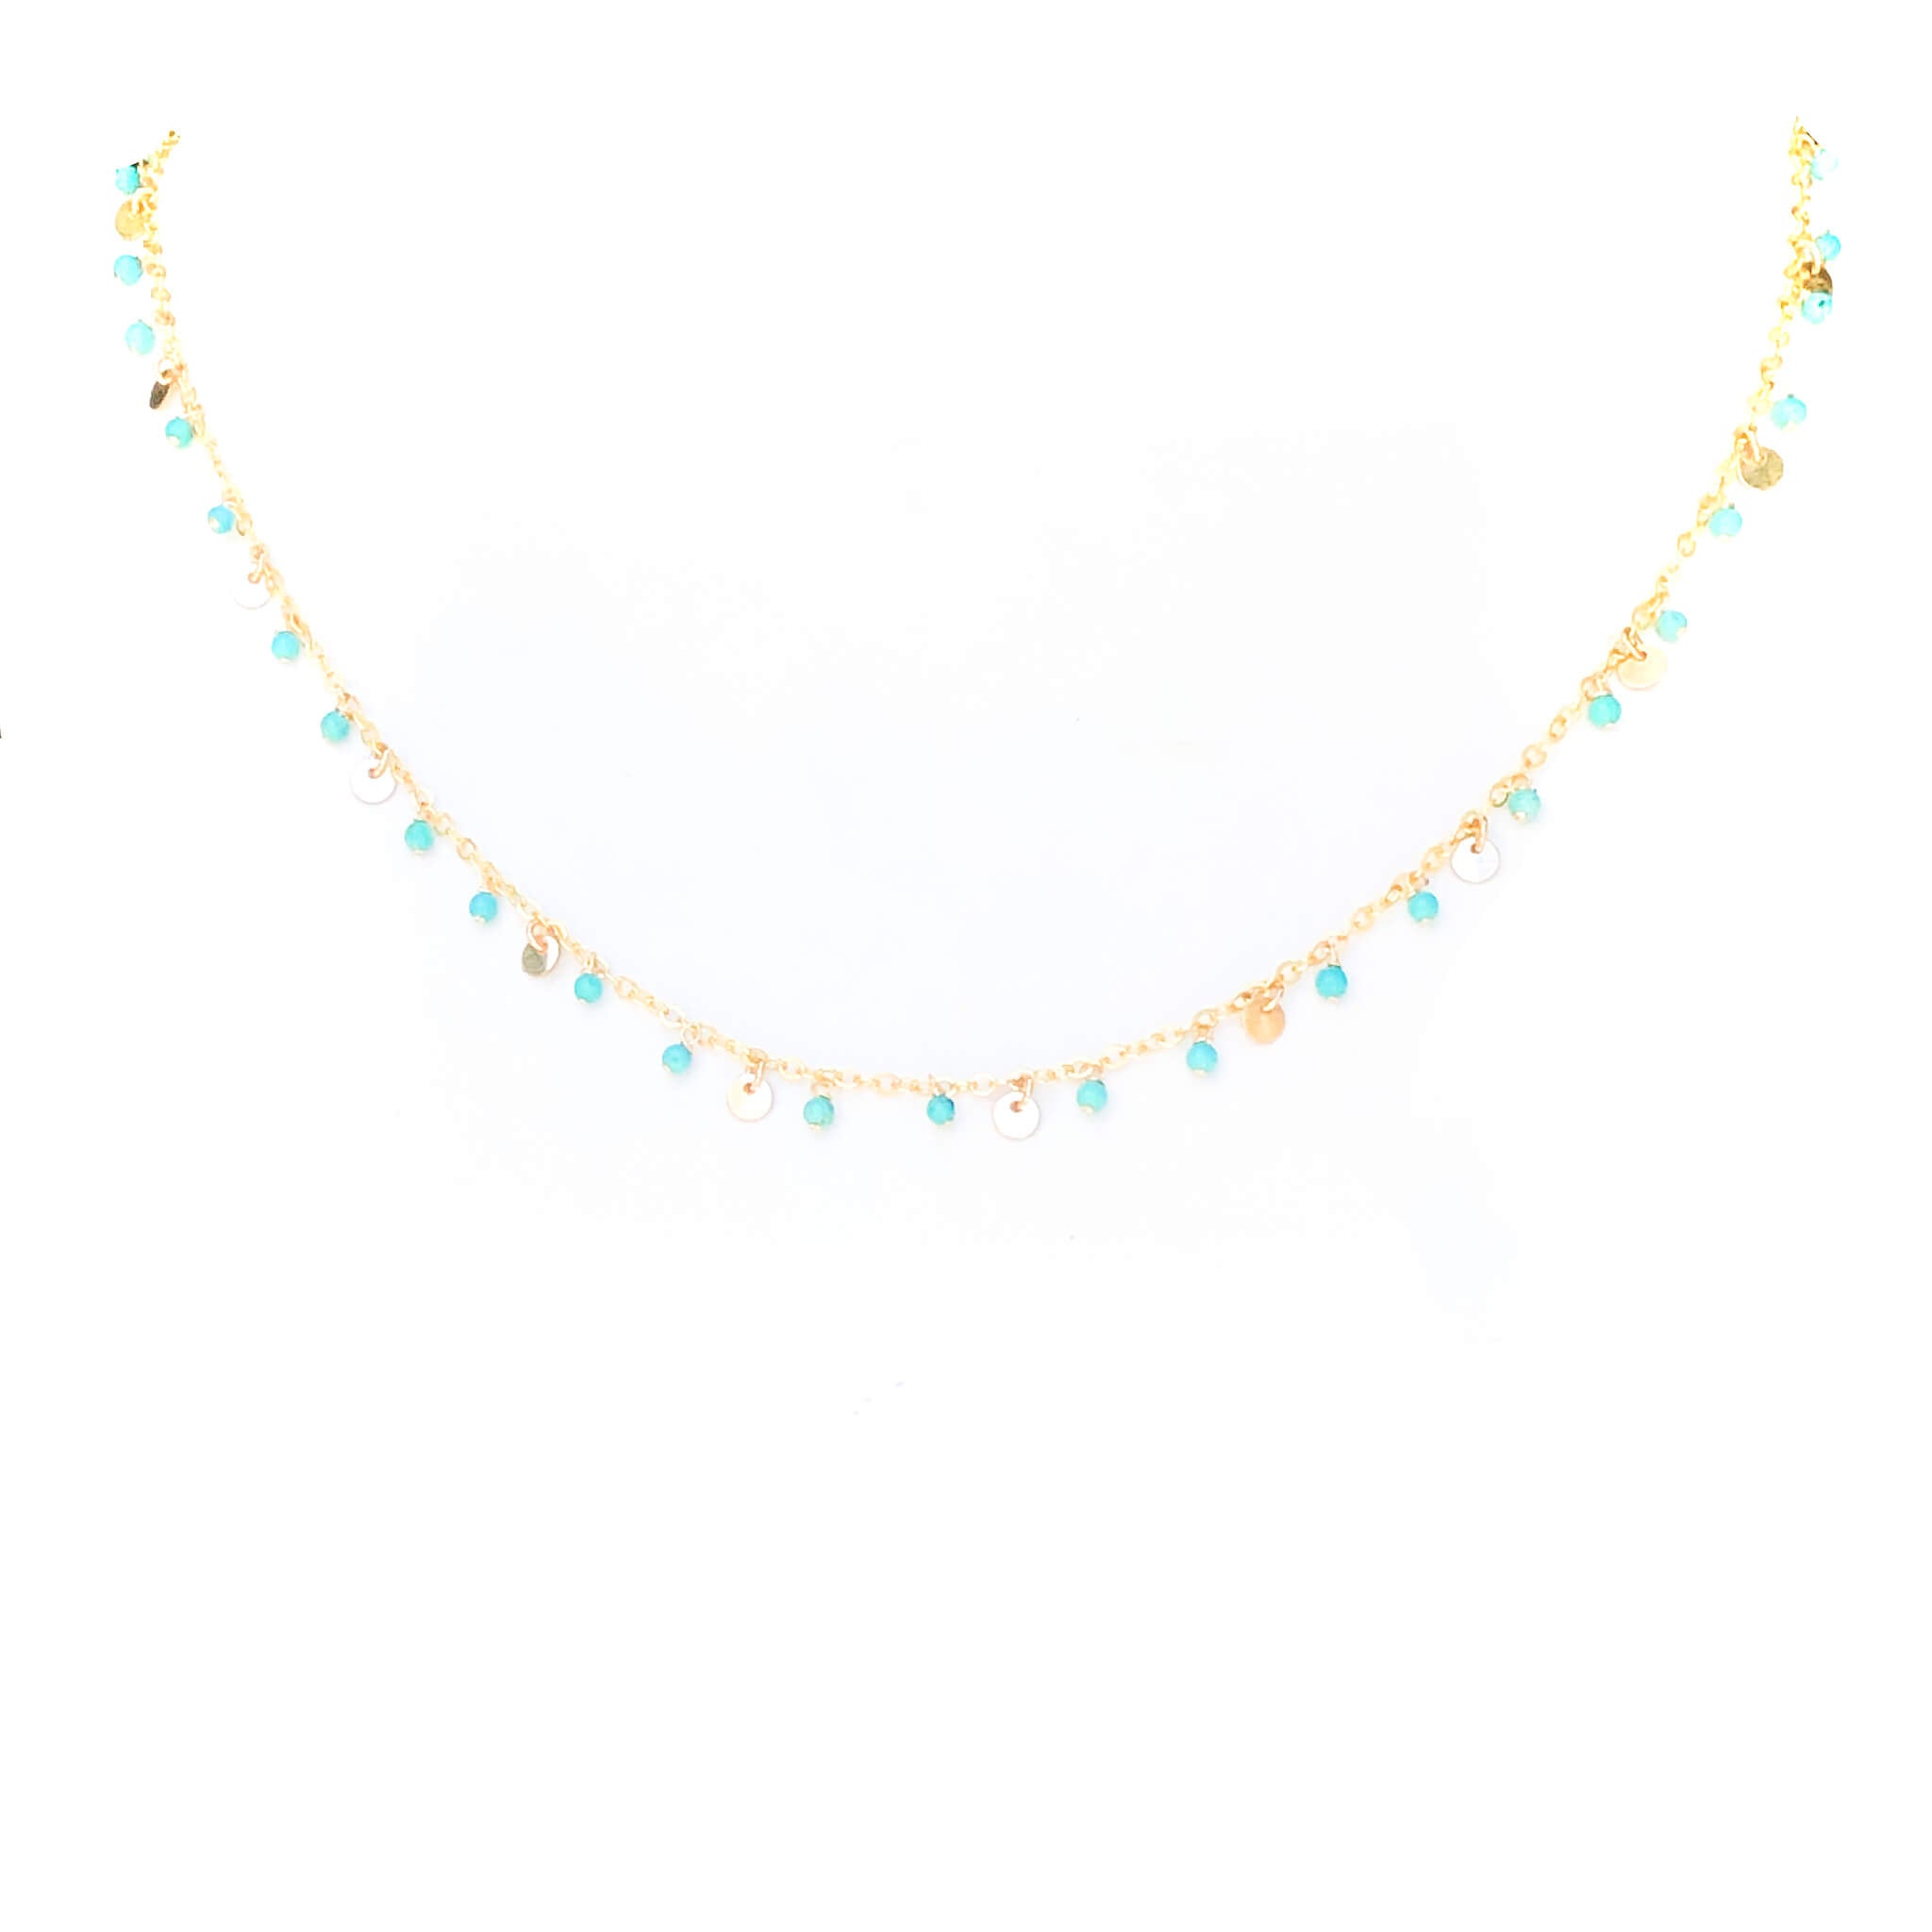 Turquoise Women Necklace